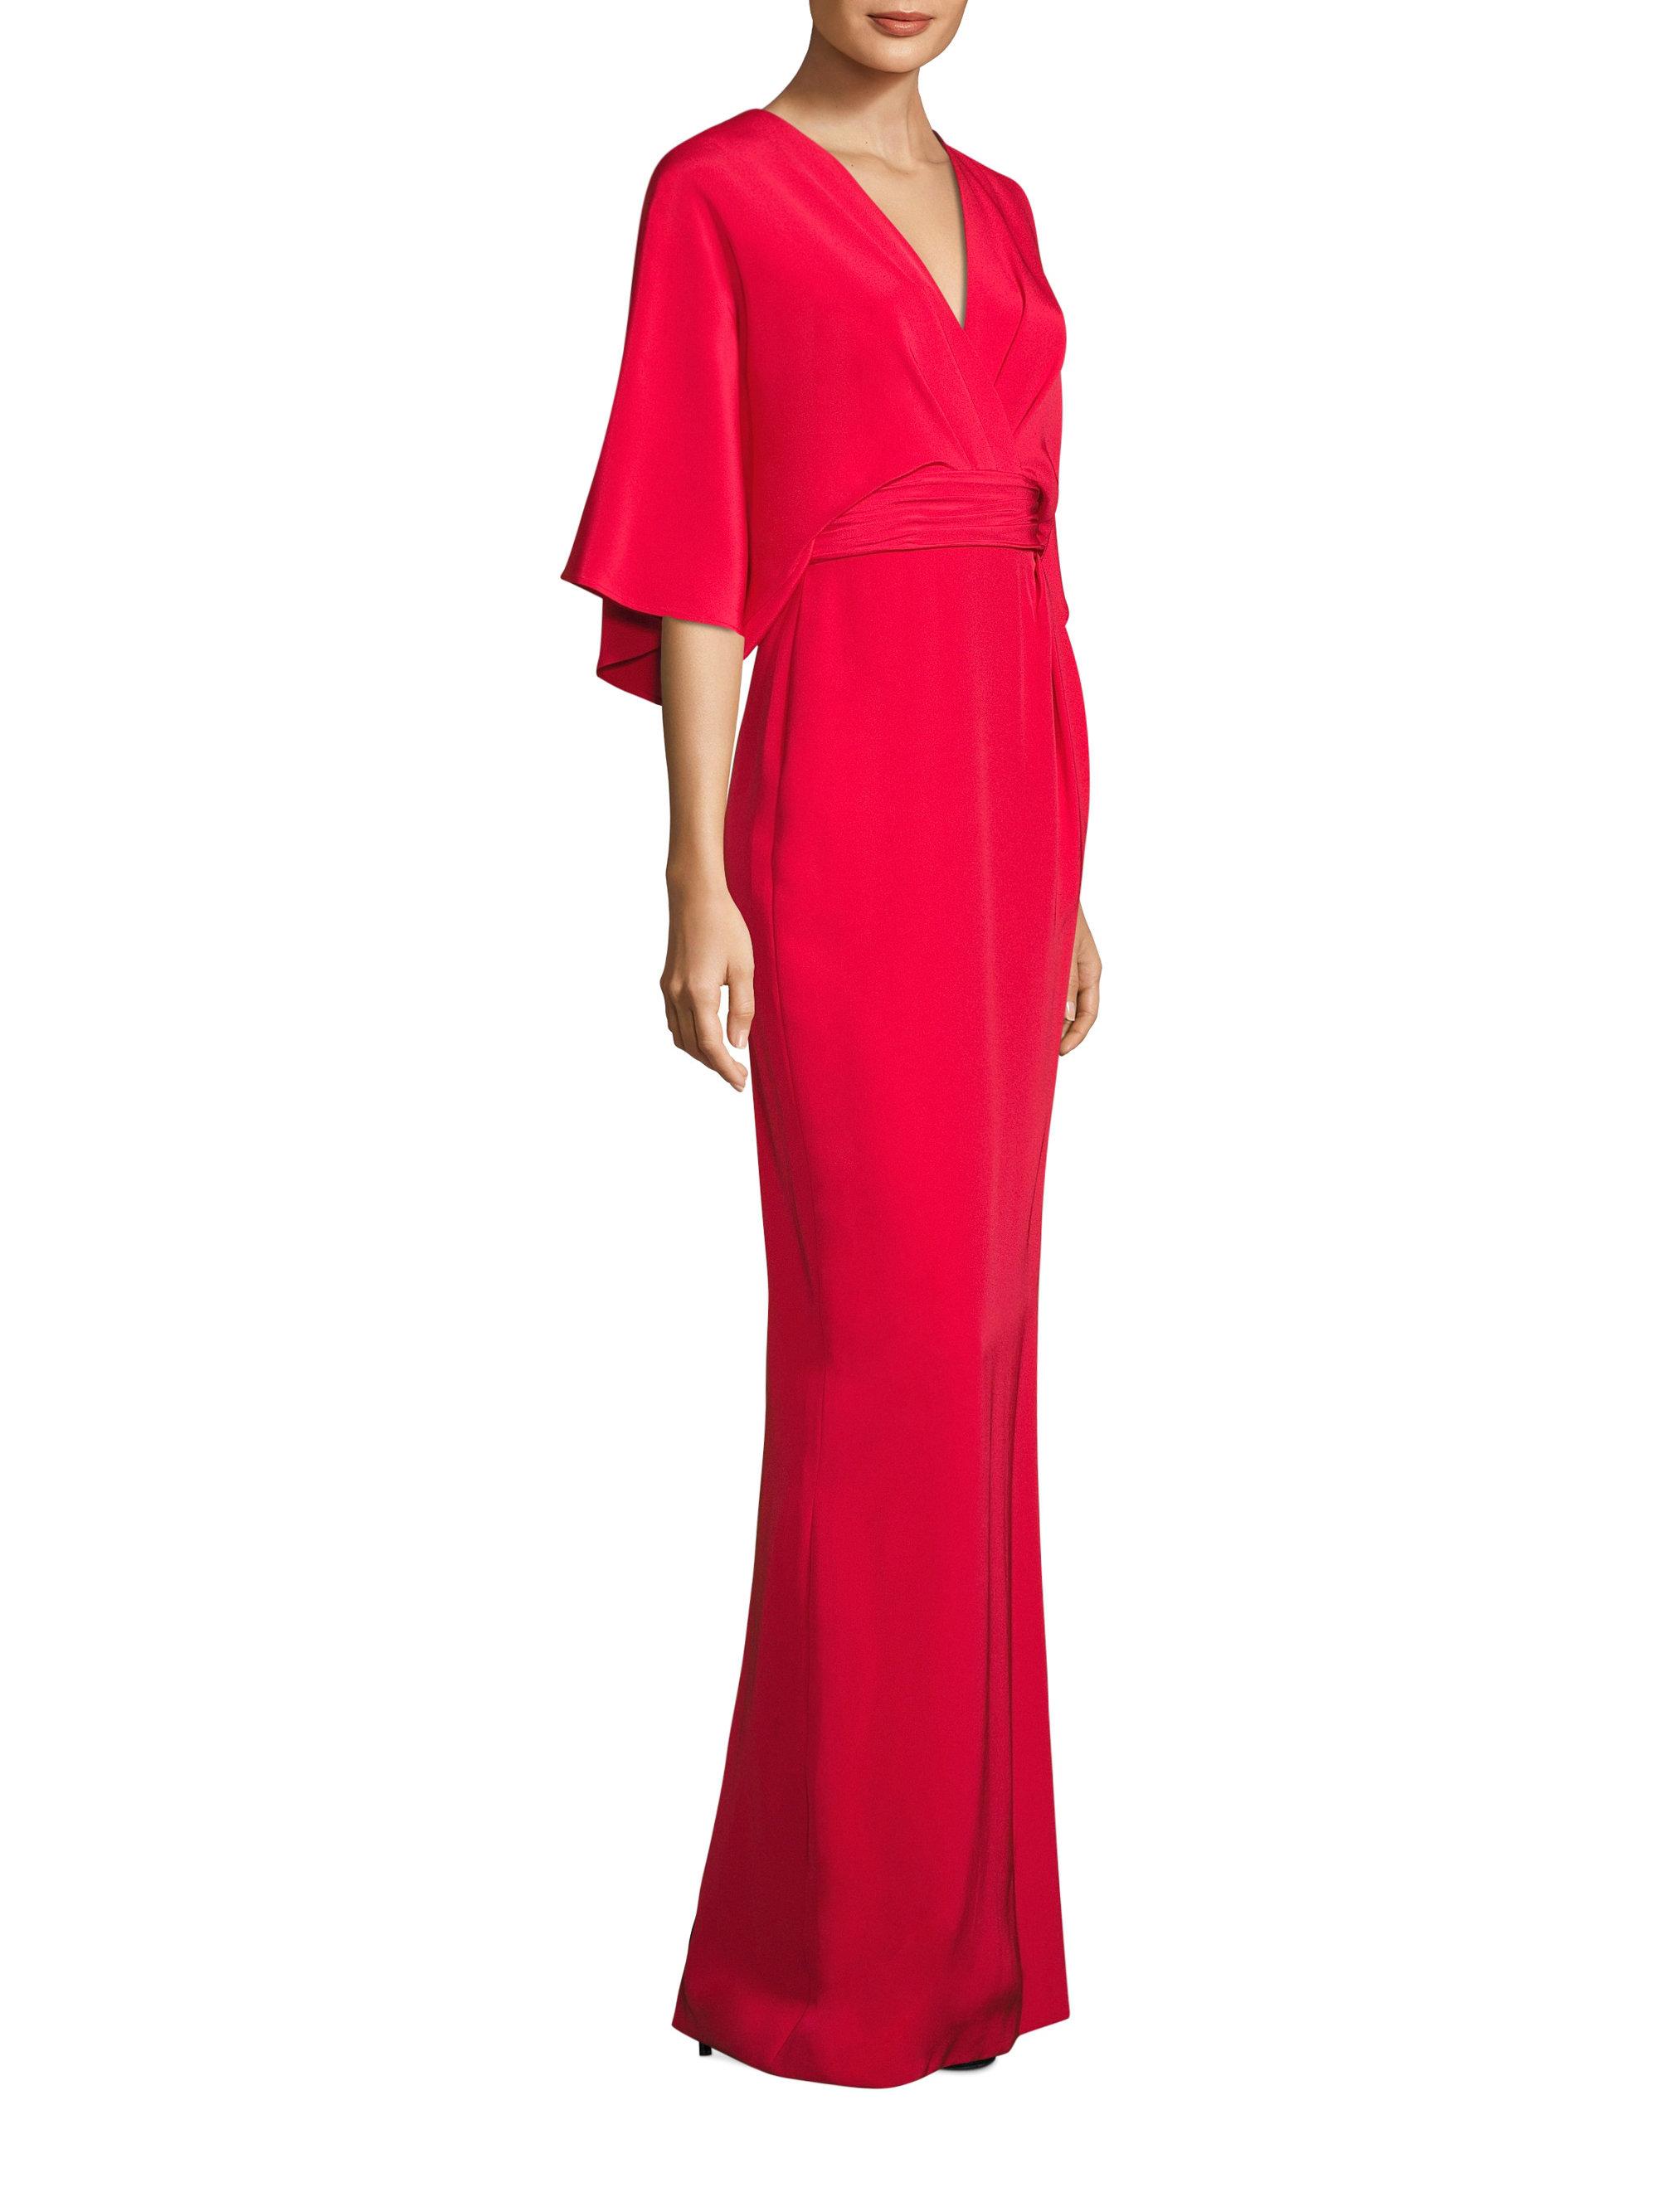 THEIA Solid Silk Blend Kimono Gown in Red - Lyst